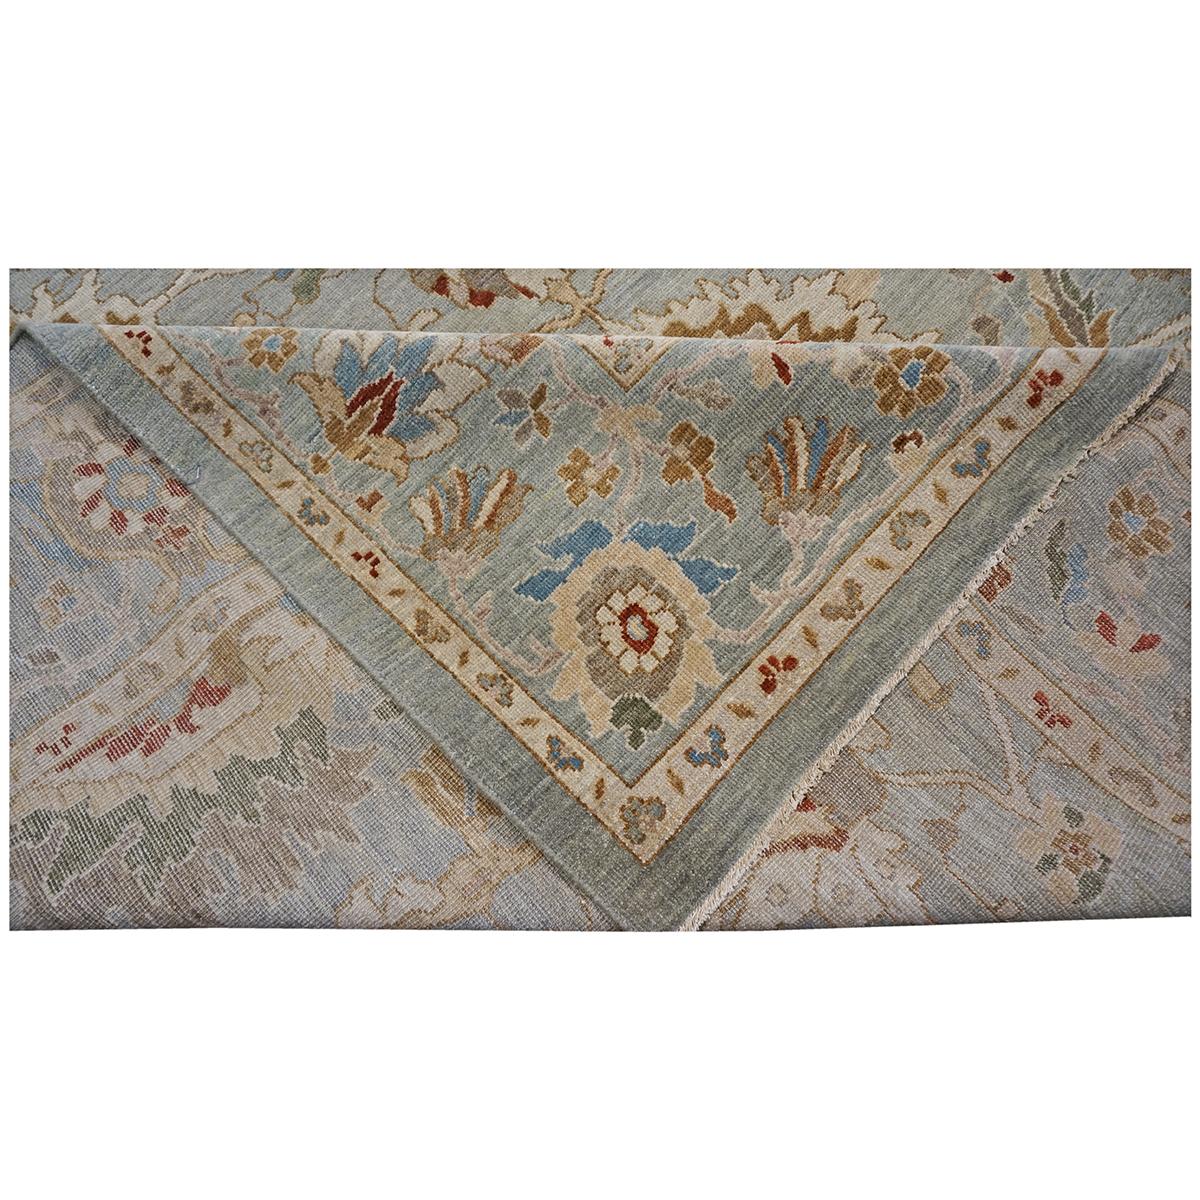 Wool 21st Century Sultanabad Master 9x12 Slate, Ivory, Blue, Red Handmade Area Rug For Sale